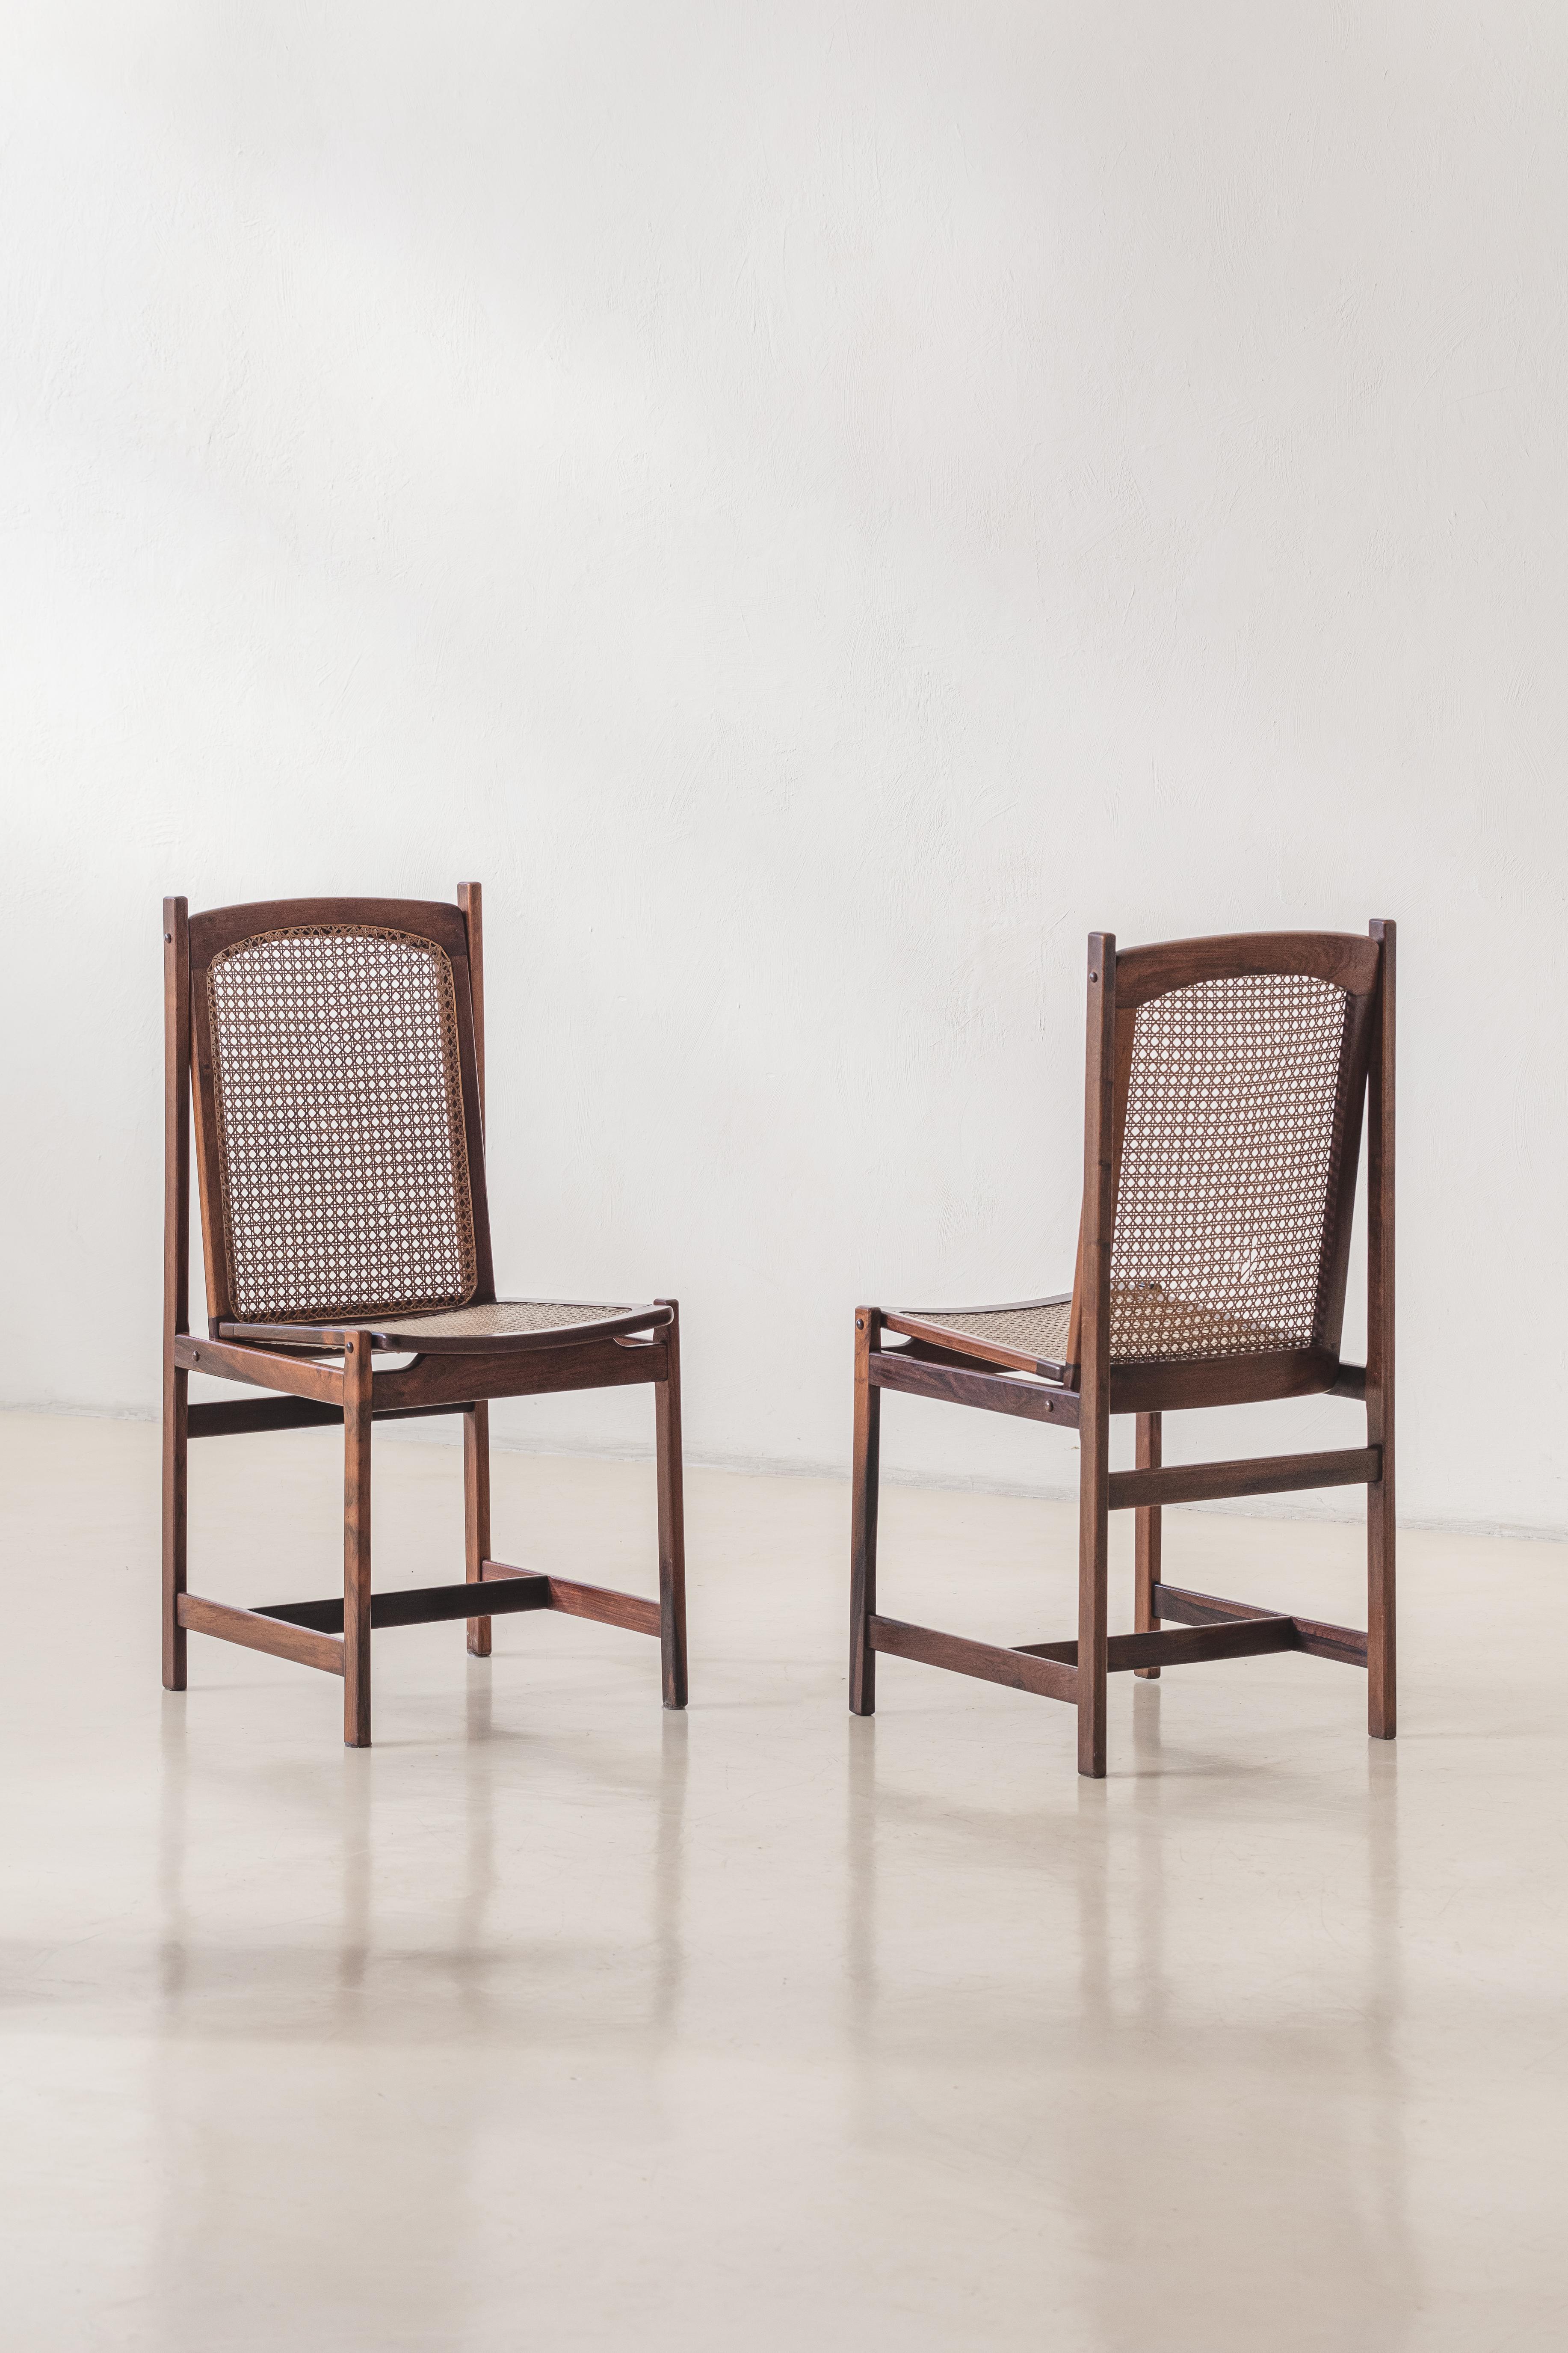 Mid-20th Century Celina Decorações Set of Six Dining Chairs, Rosewood and Cane, Midcentury 1960s For Sale